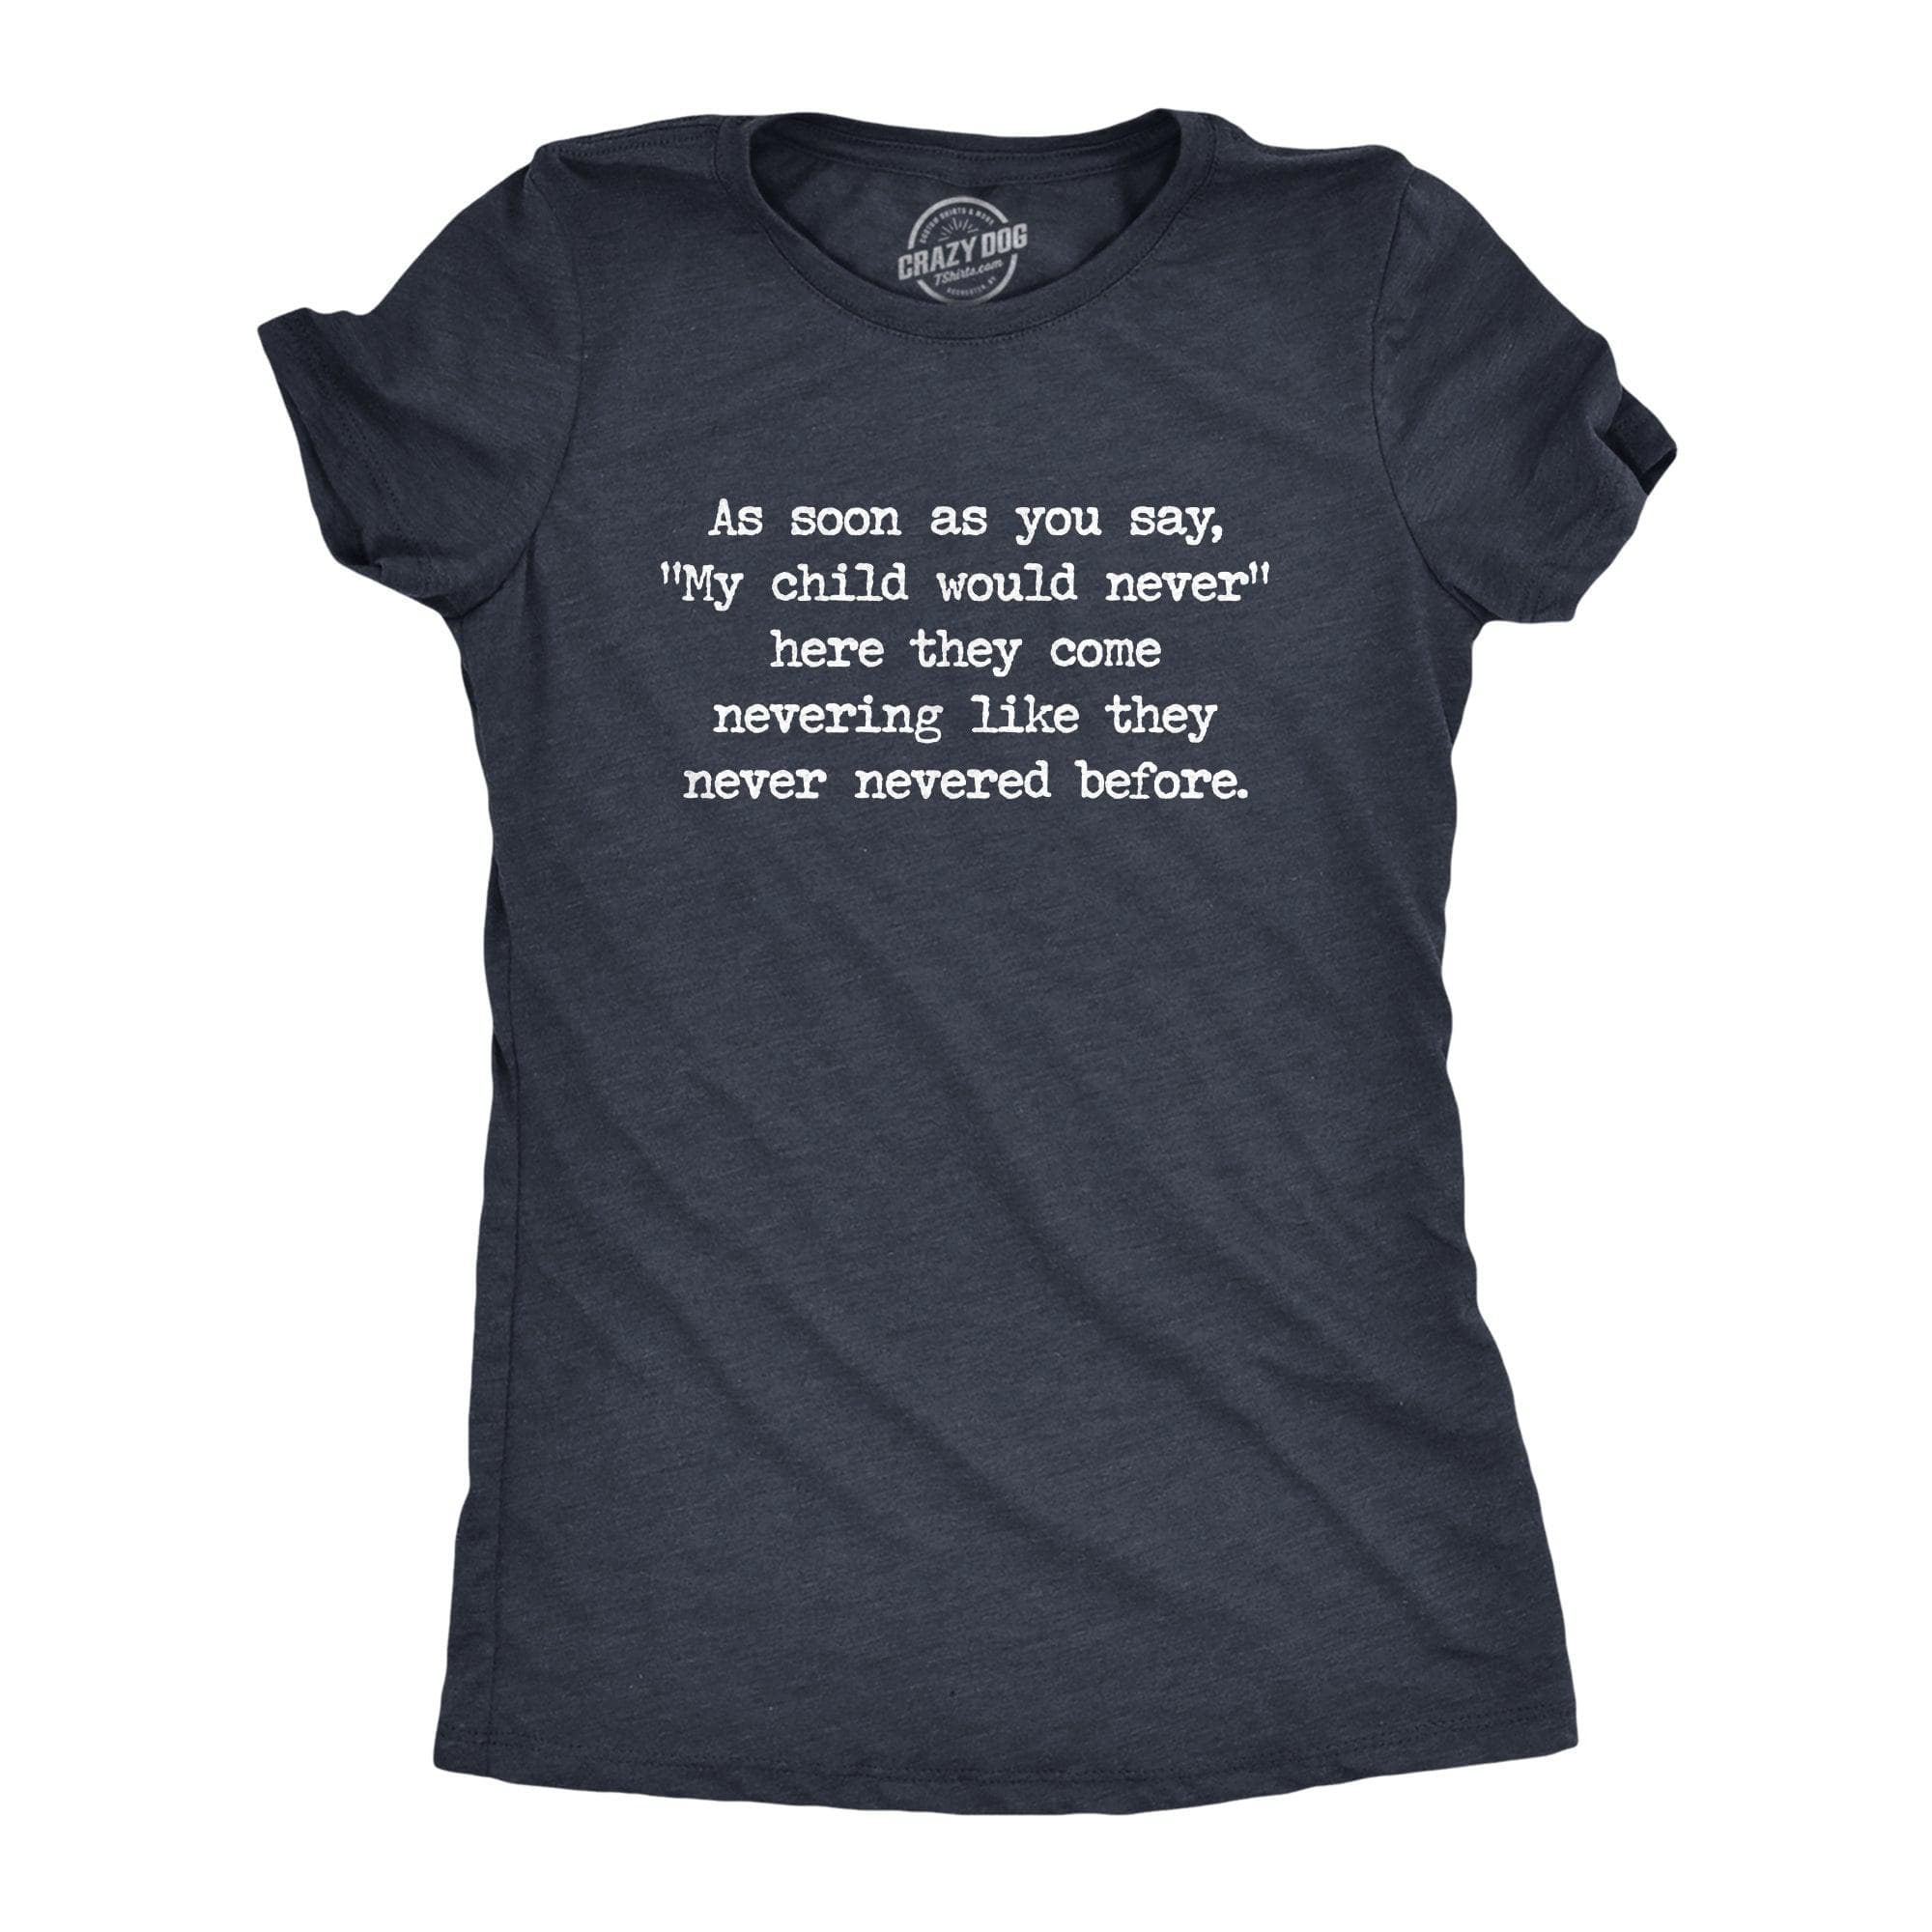 My Child Would Never Women's Tshirt  -  Crazy Dog T-Shirts